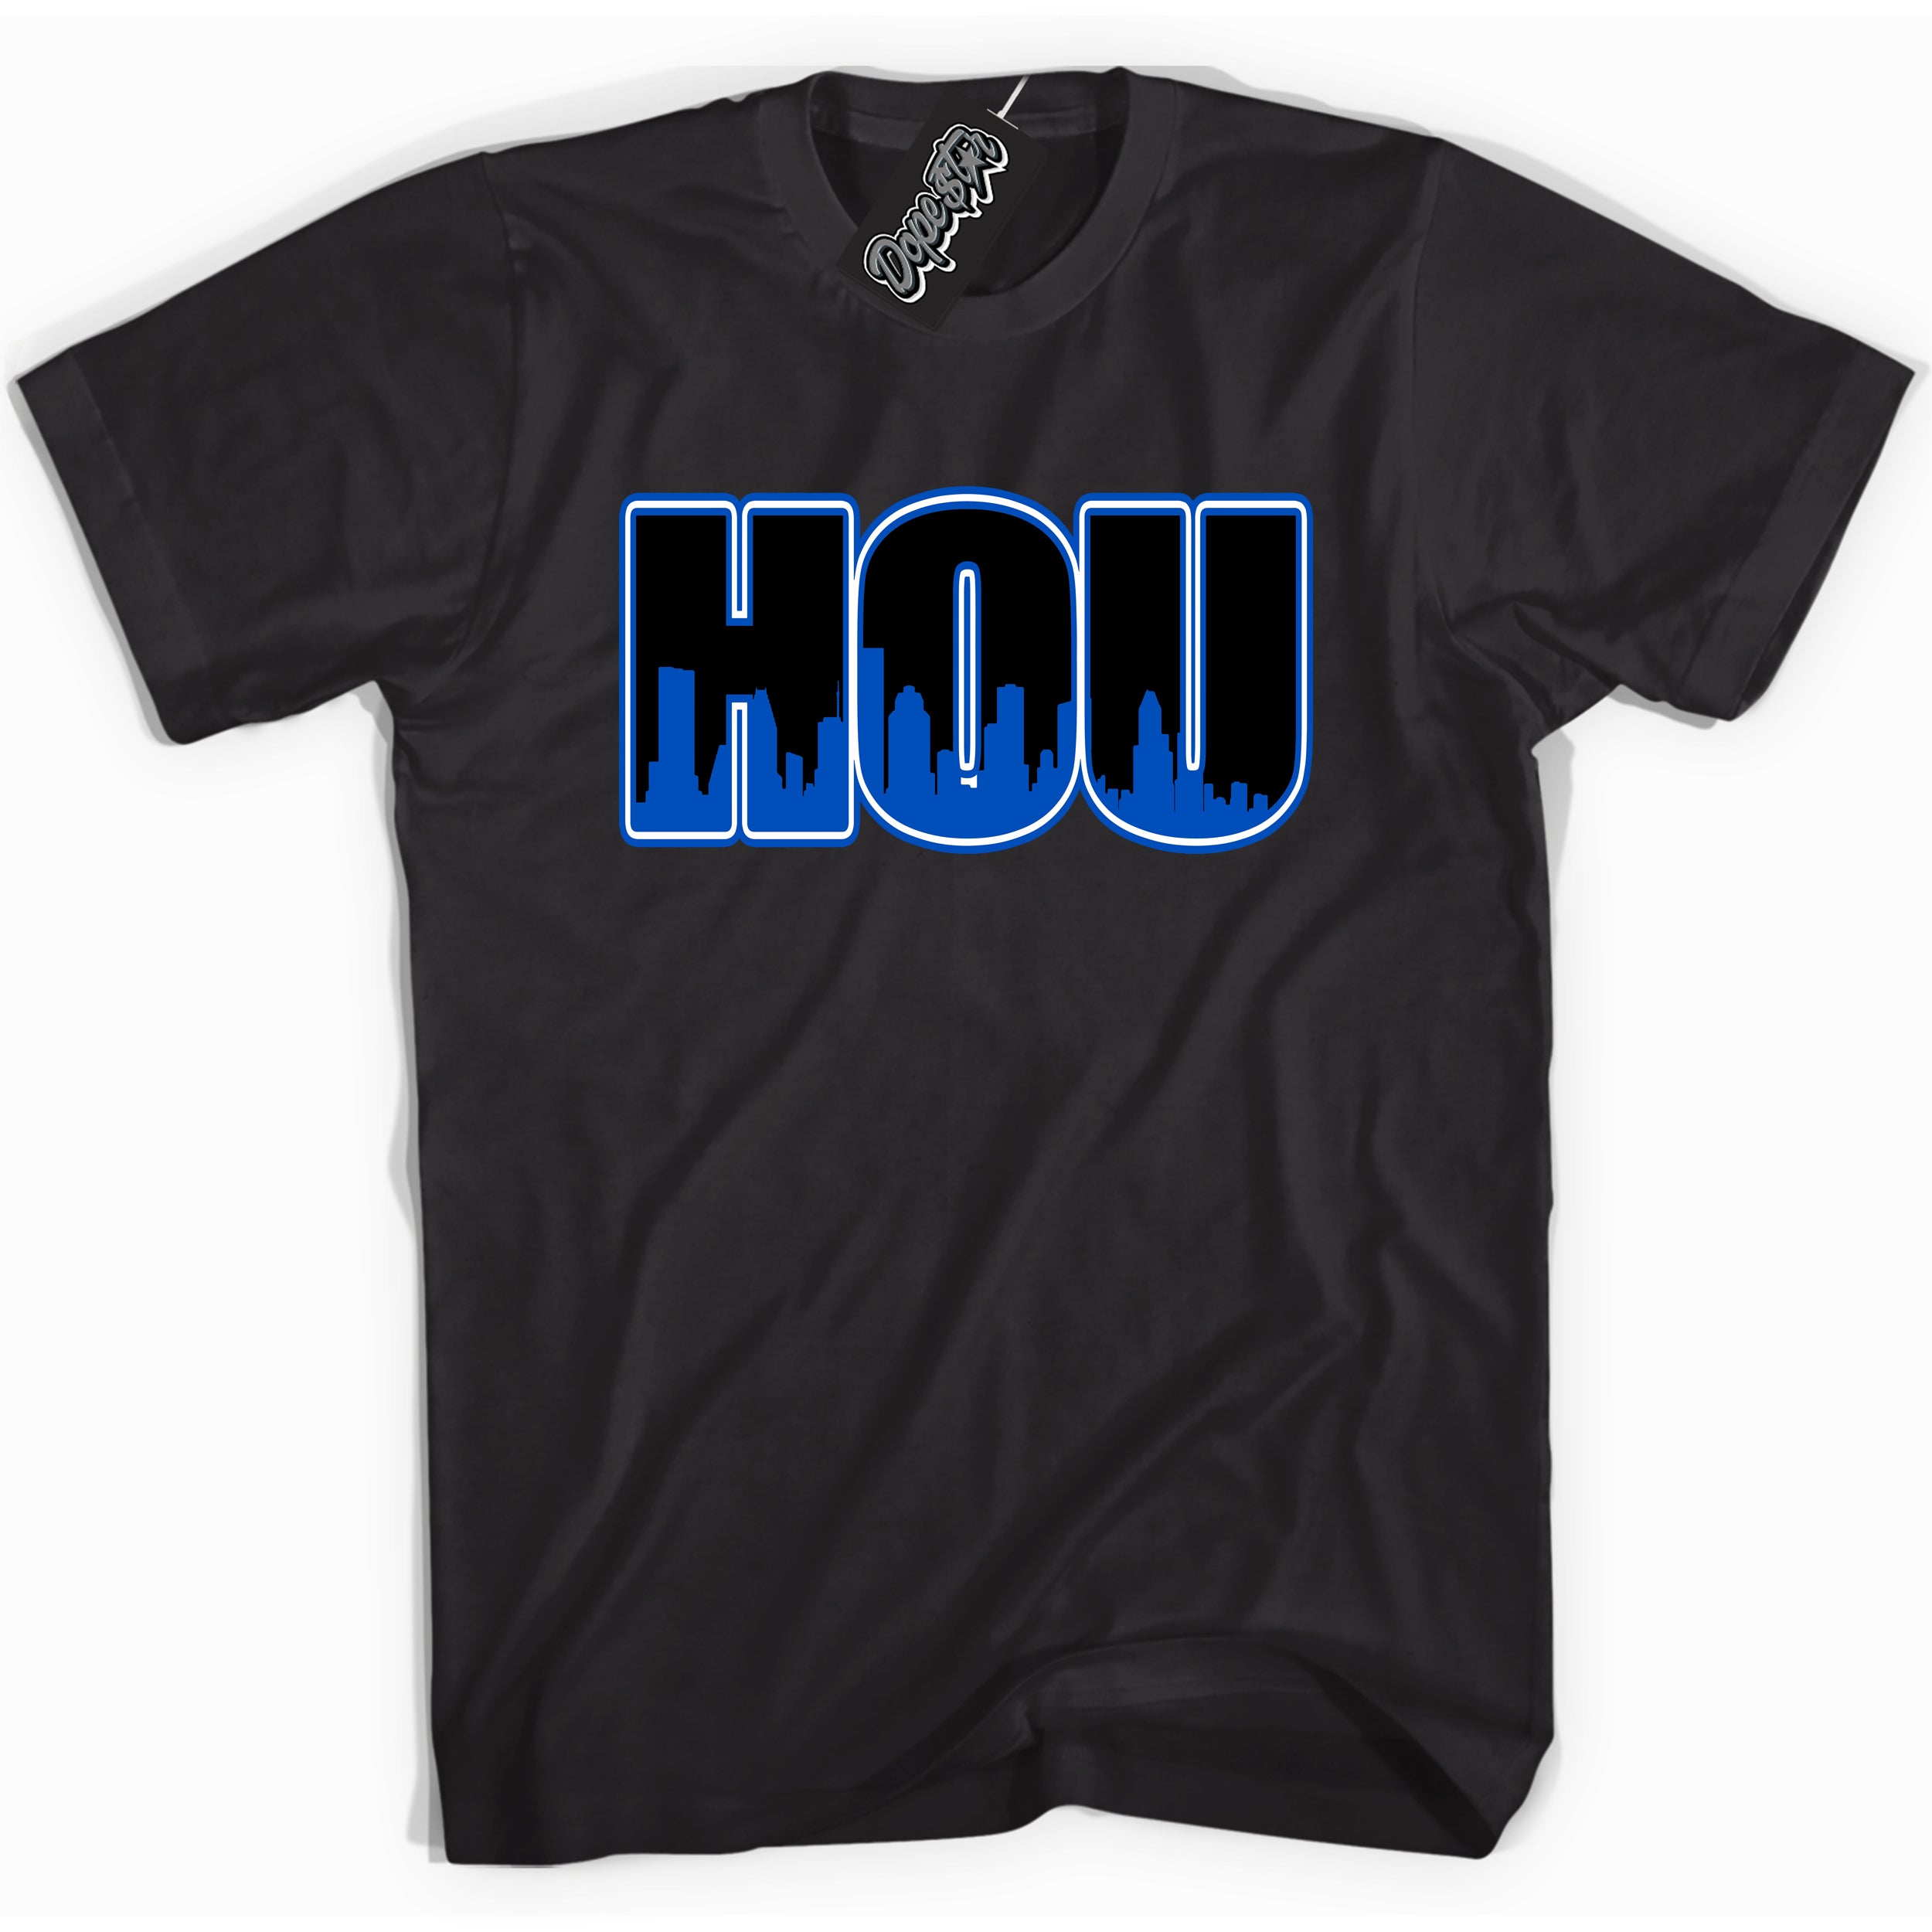 Cool Black graphic tee with Houston print, that perfectly matches OG Royal Reimagined 1s sneakers 